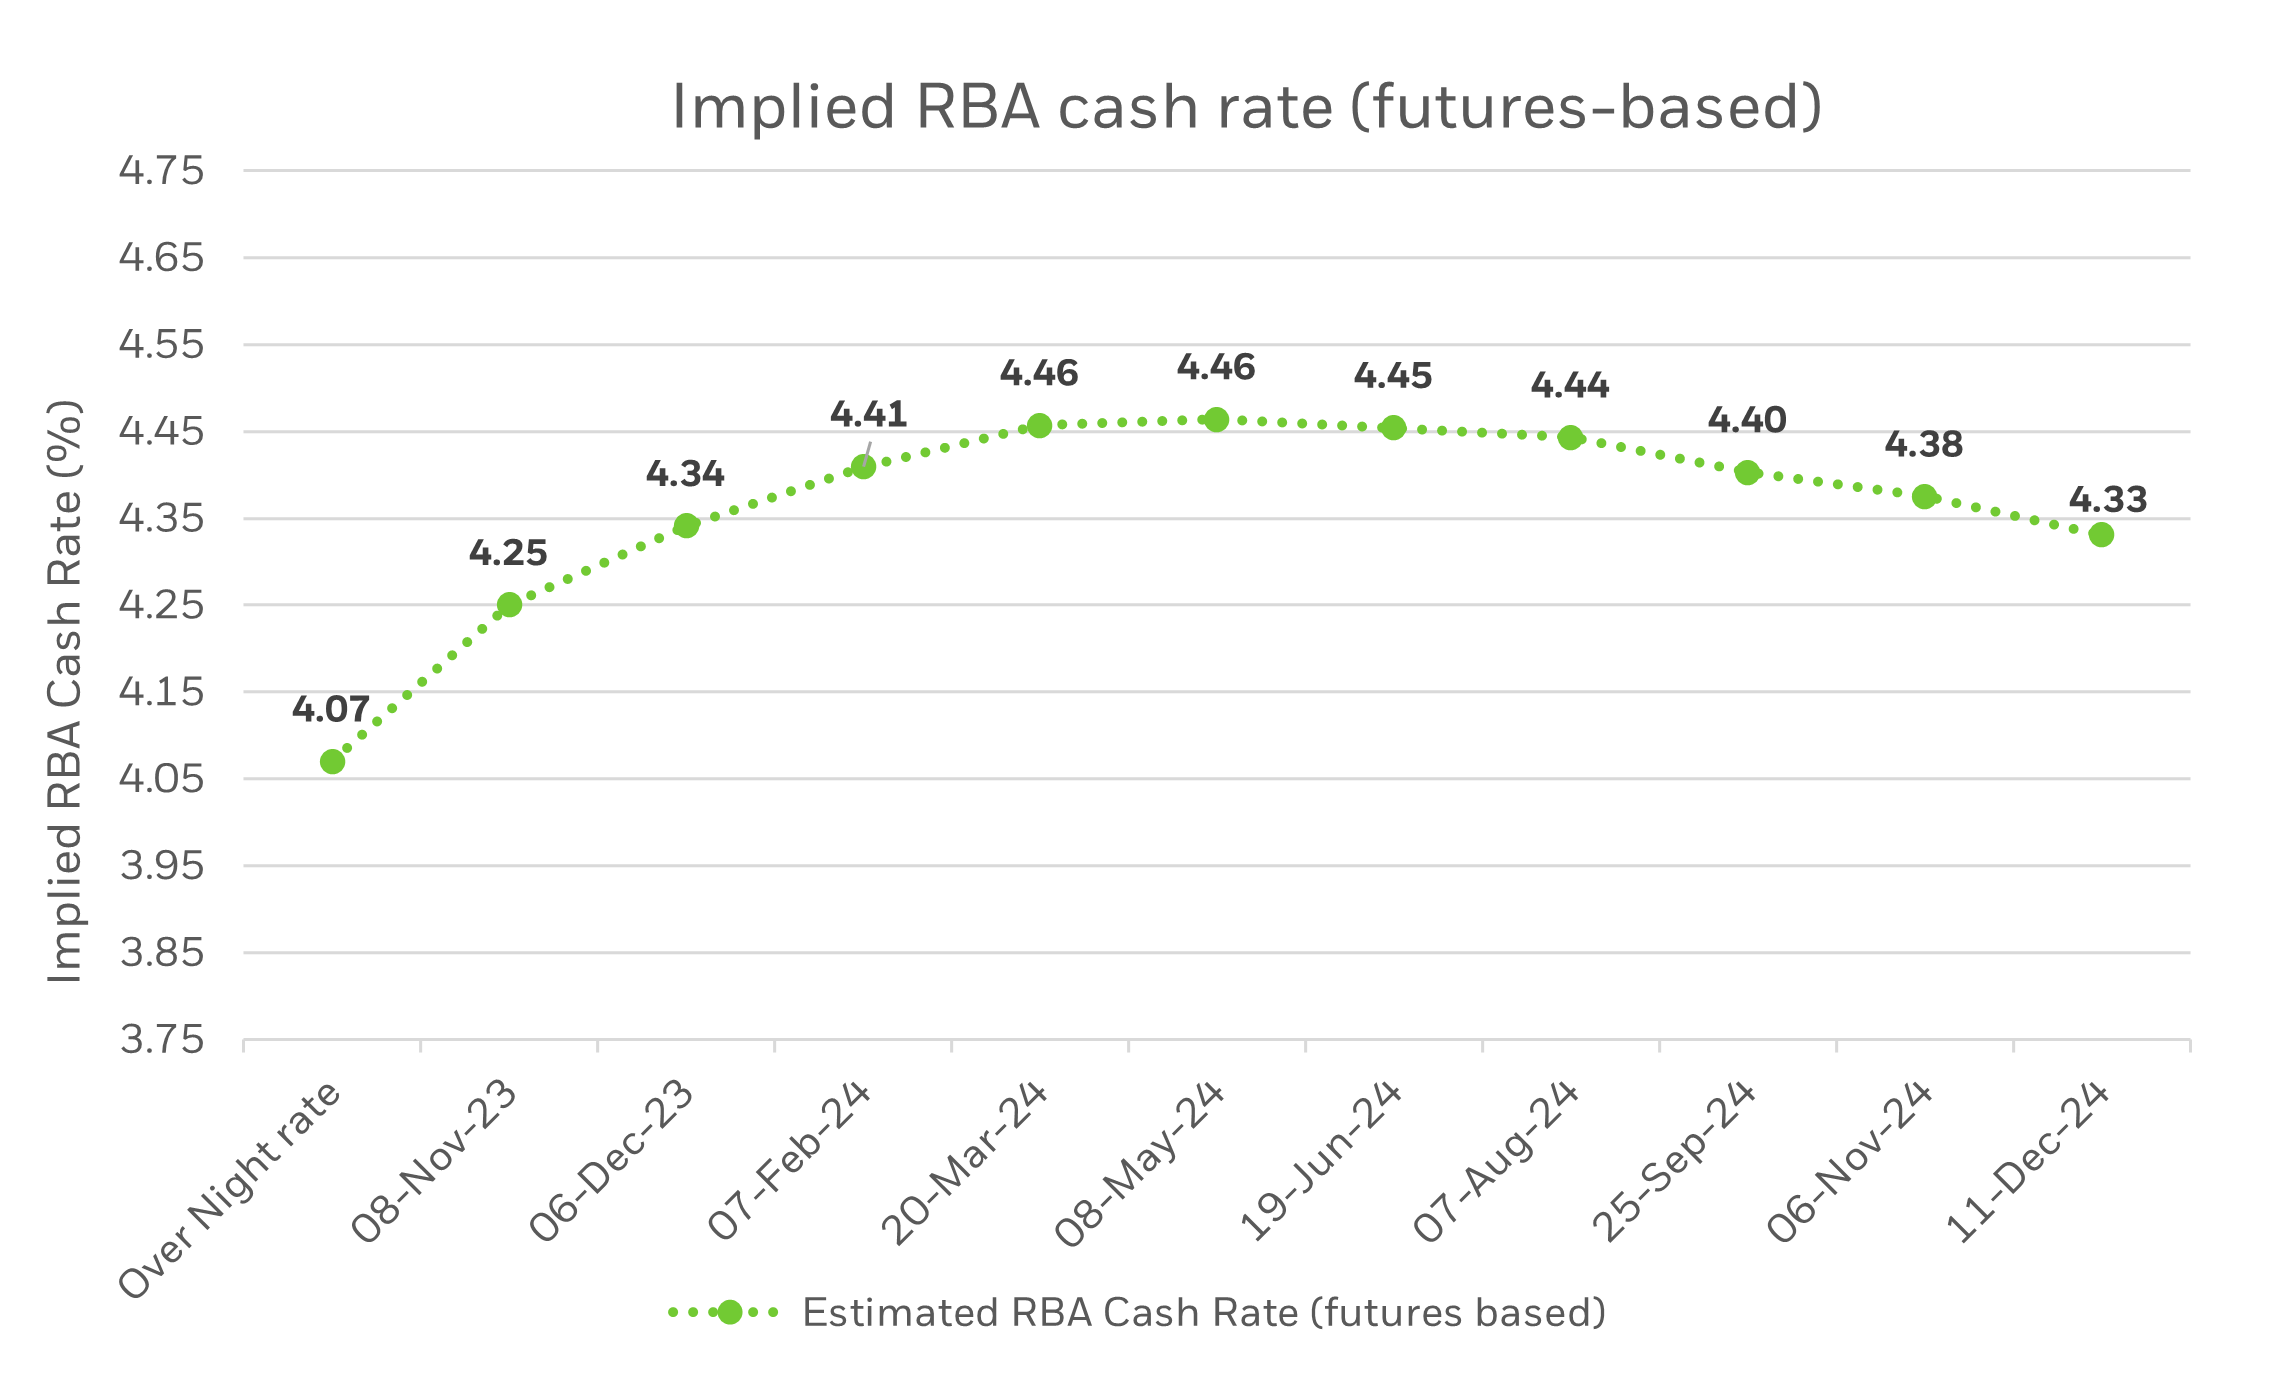 Implied RBA cash rate (futures-based) chart